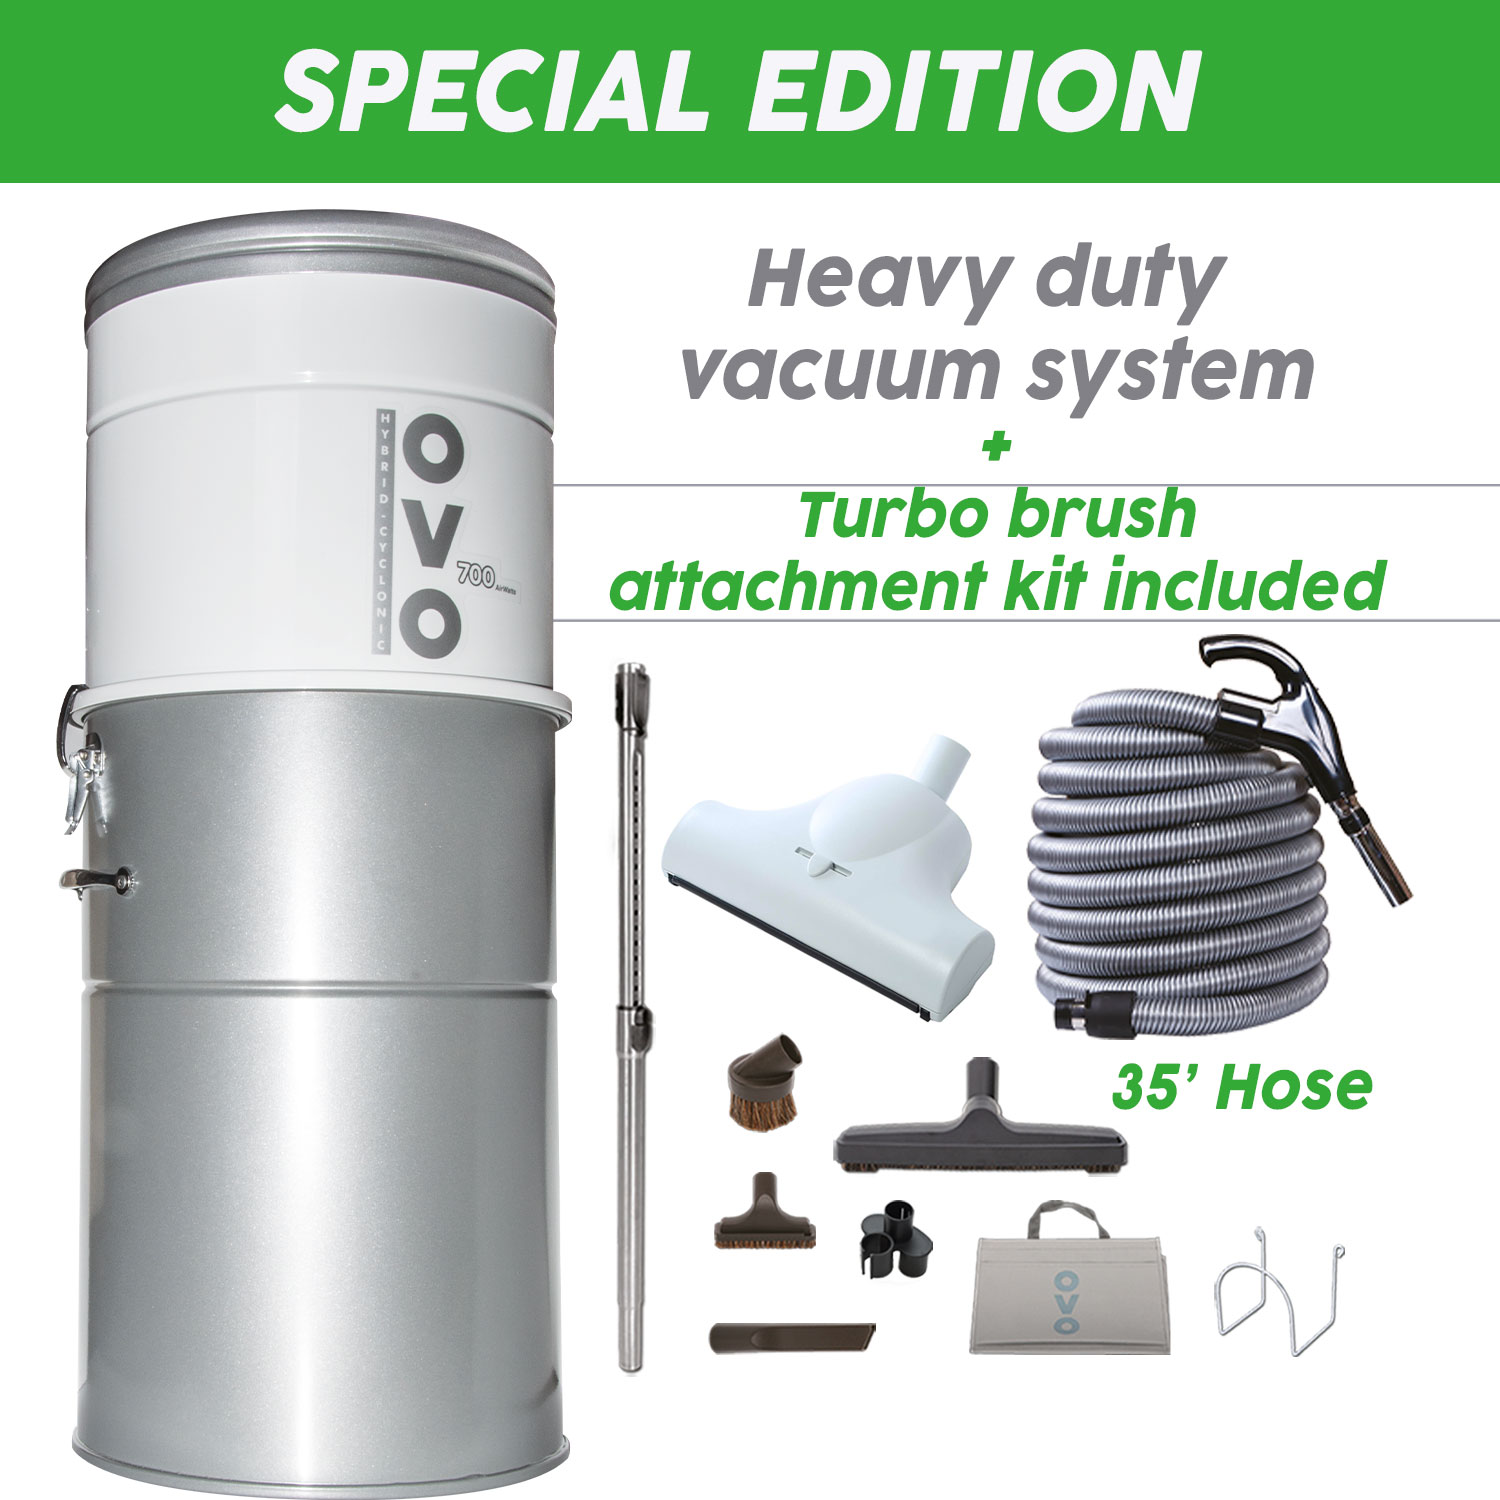 Best Central Vacuum System Ovo Heavy, Best Central Vacuum Attachment For Hardwood Floors